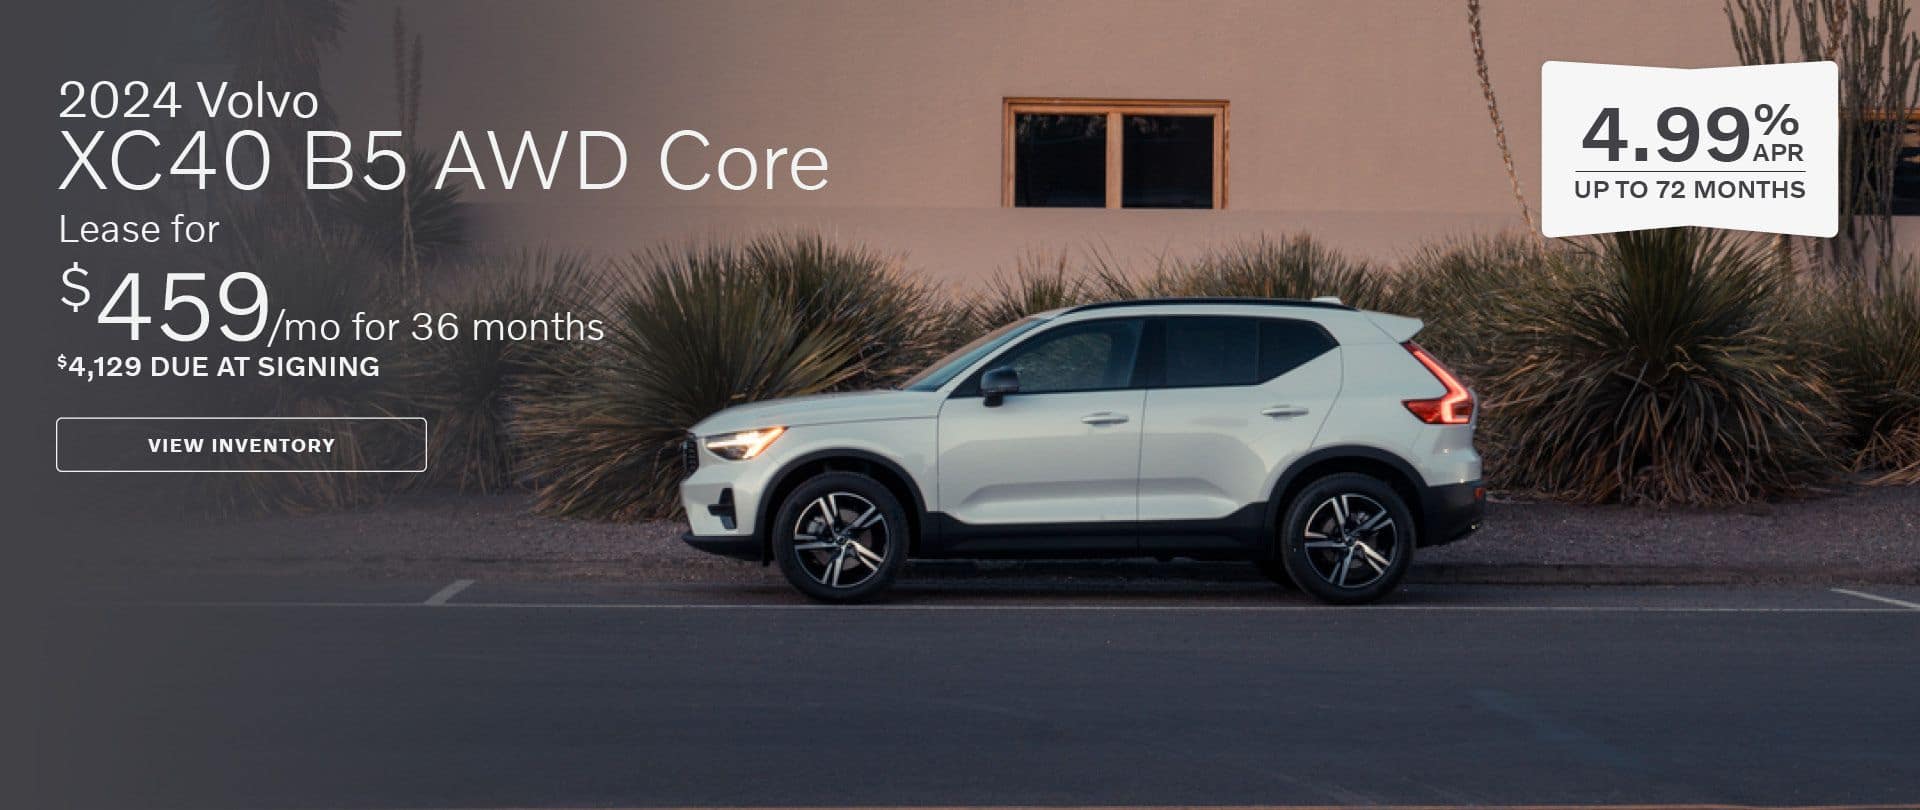 Southern_ROR-Apr24-2024 Volvo XC40 B5 AWD Core | Lease for $459:mo_1920x810